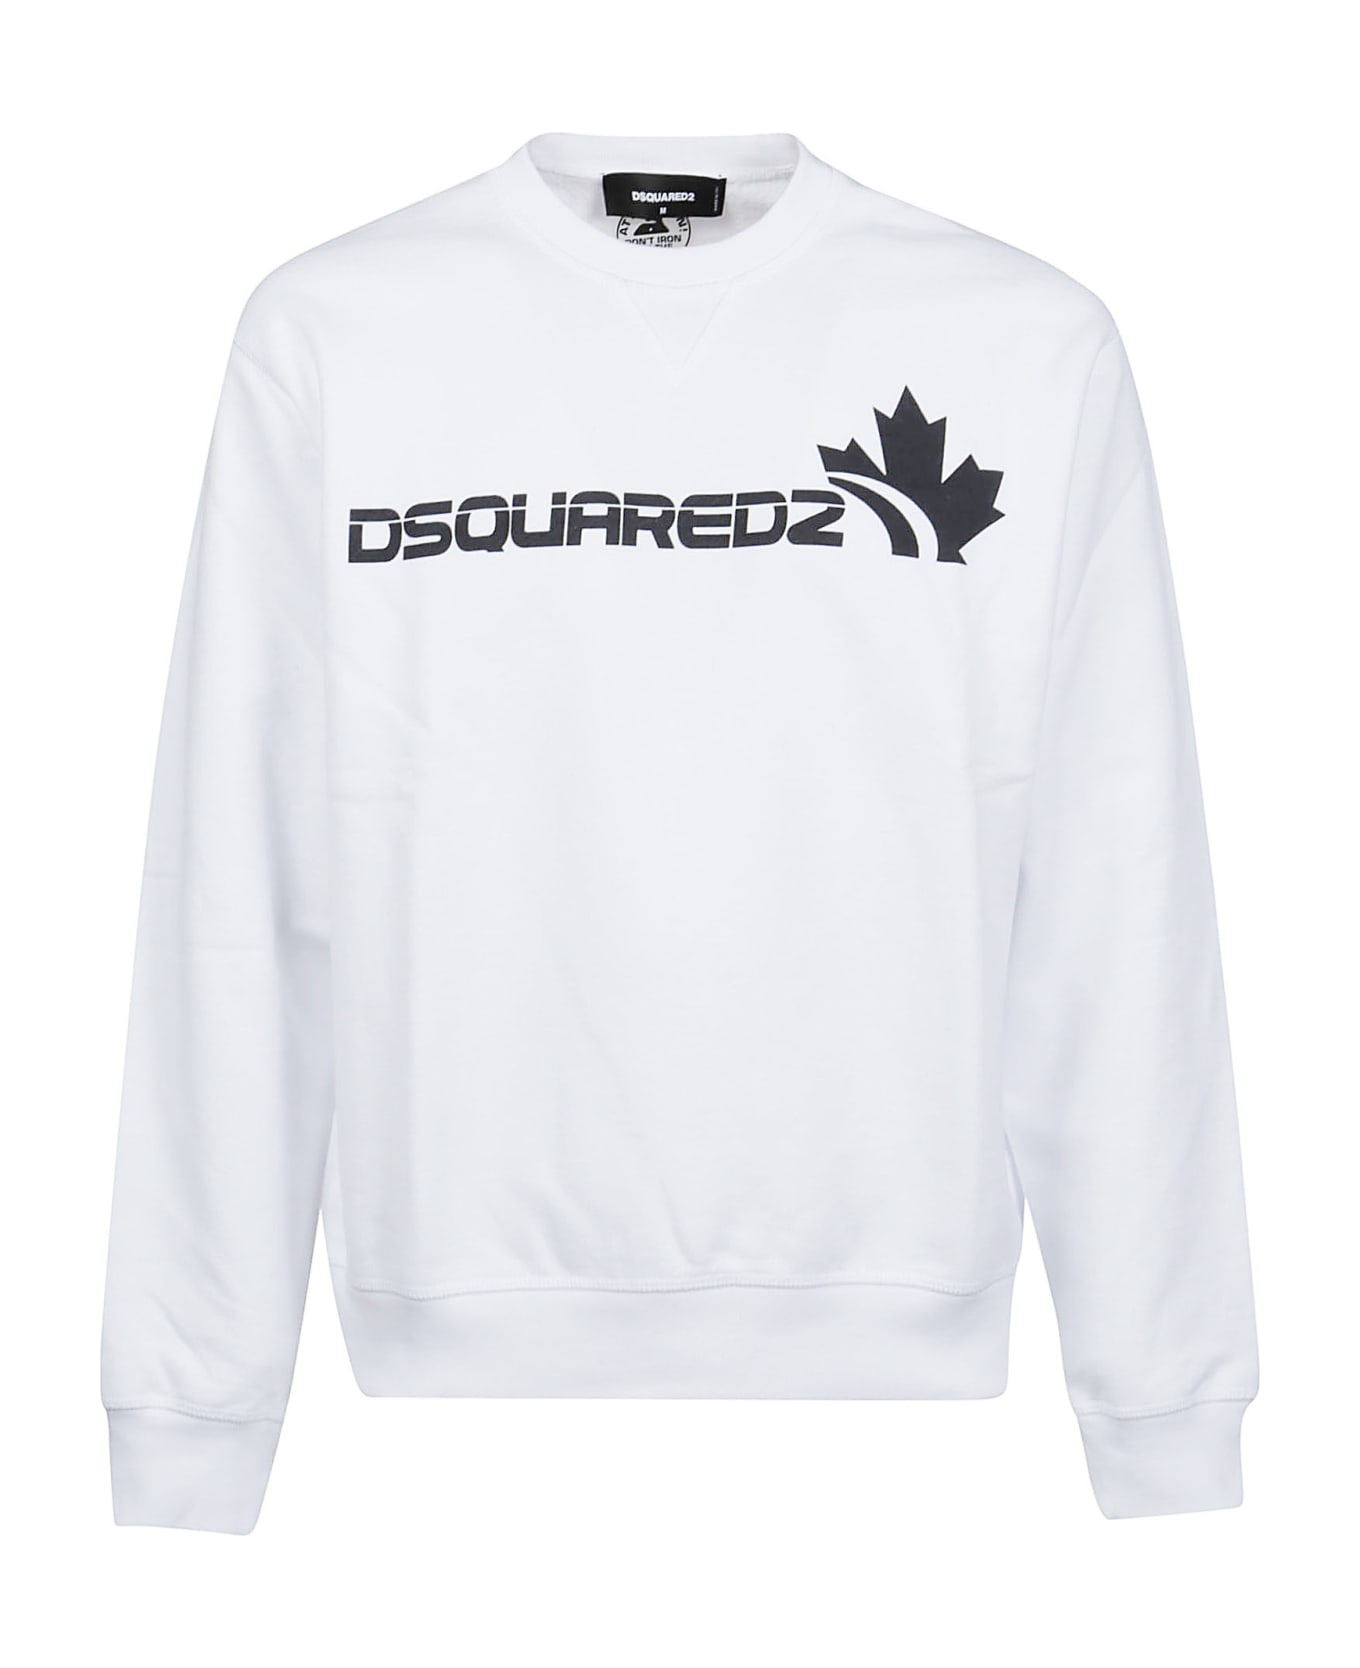 Dsquared2 Cool Fit Sweatshirt - White